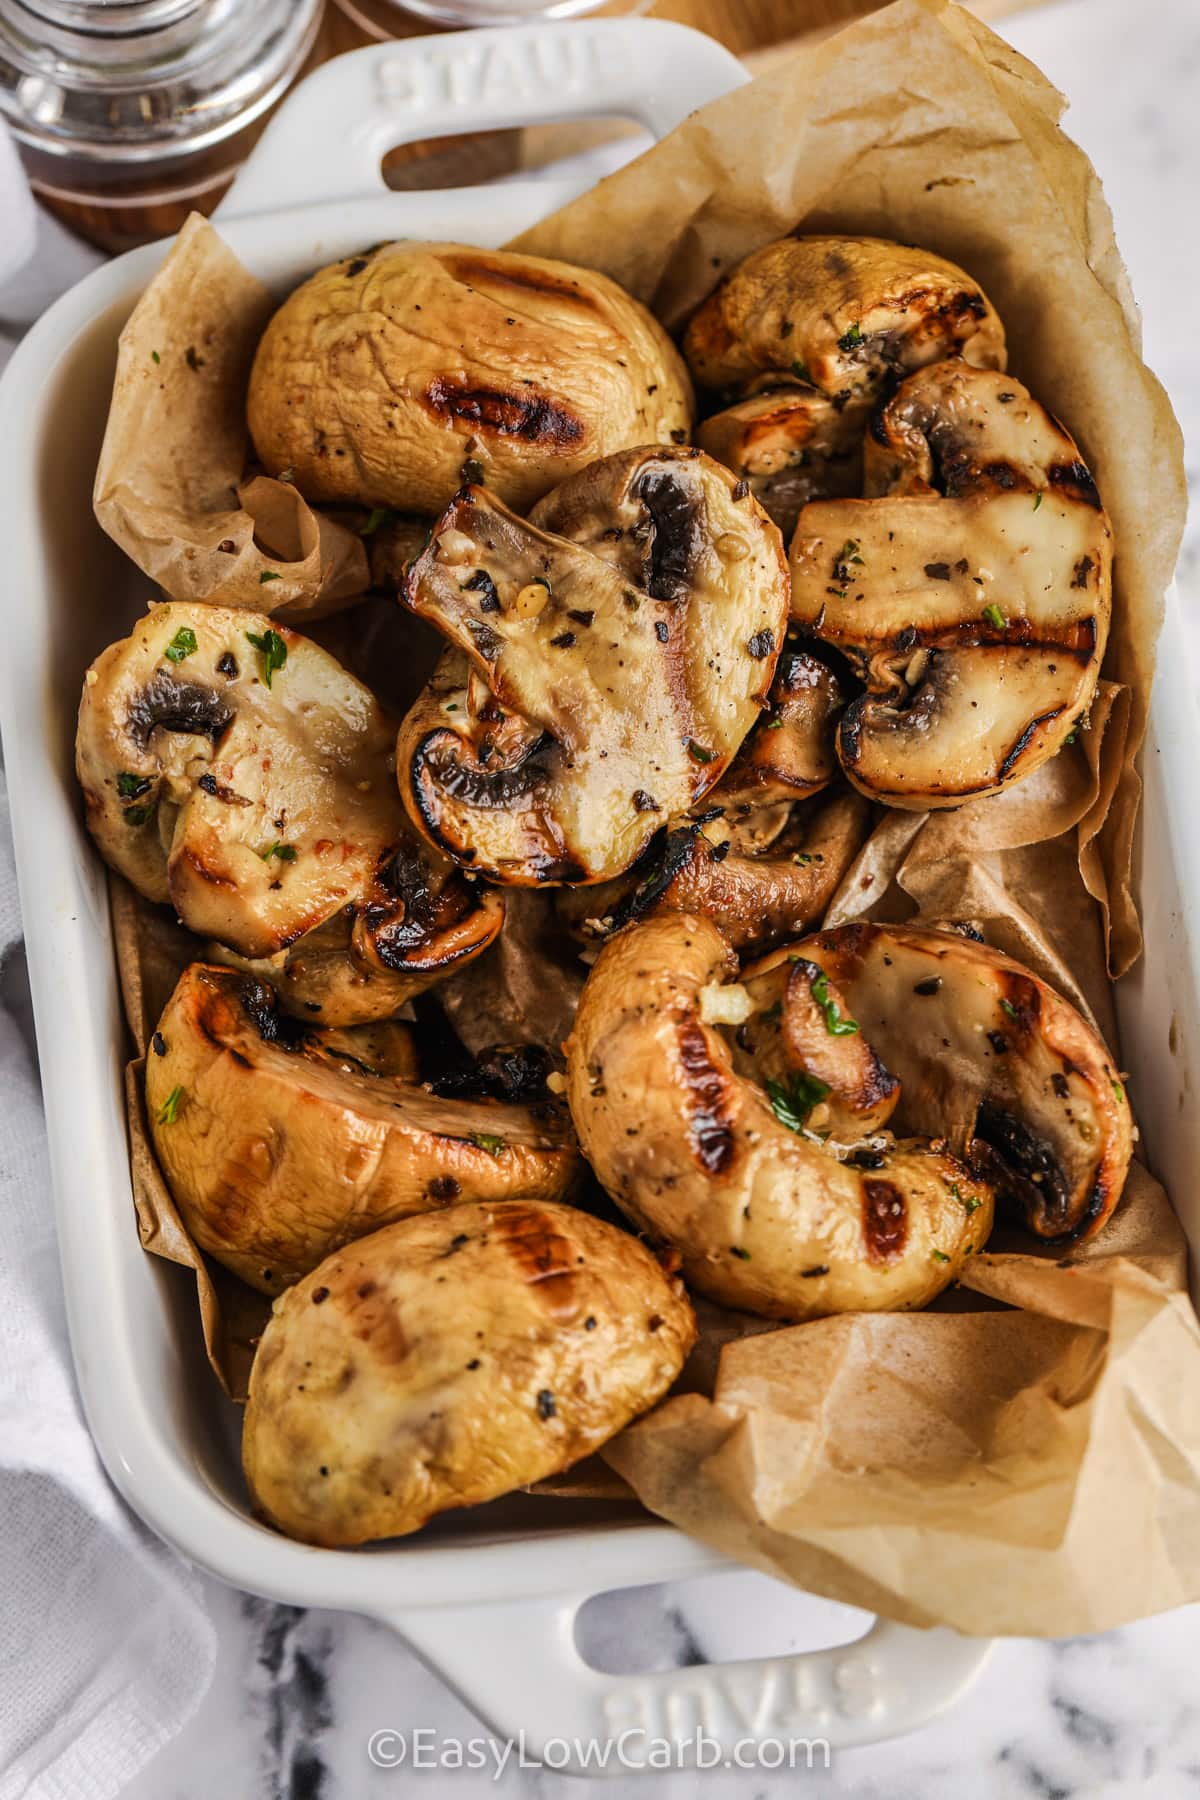 A serving dish of grilled mushrooms